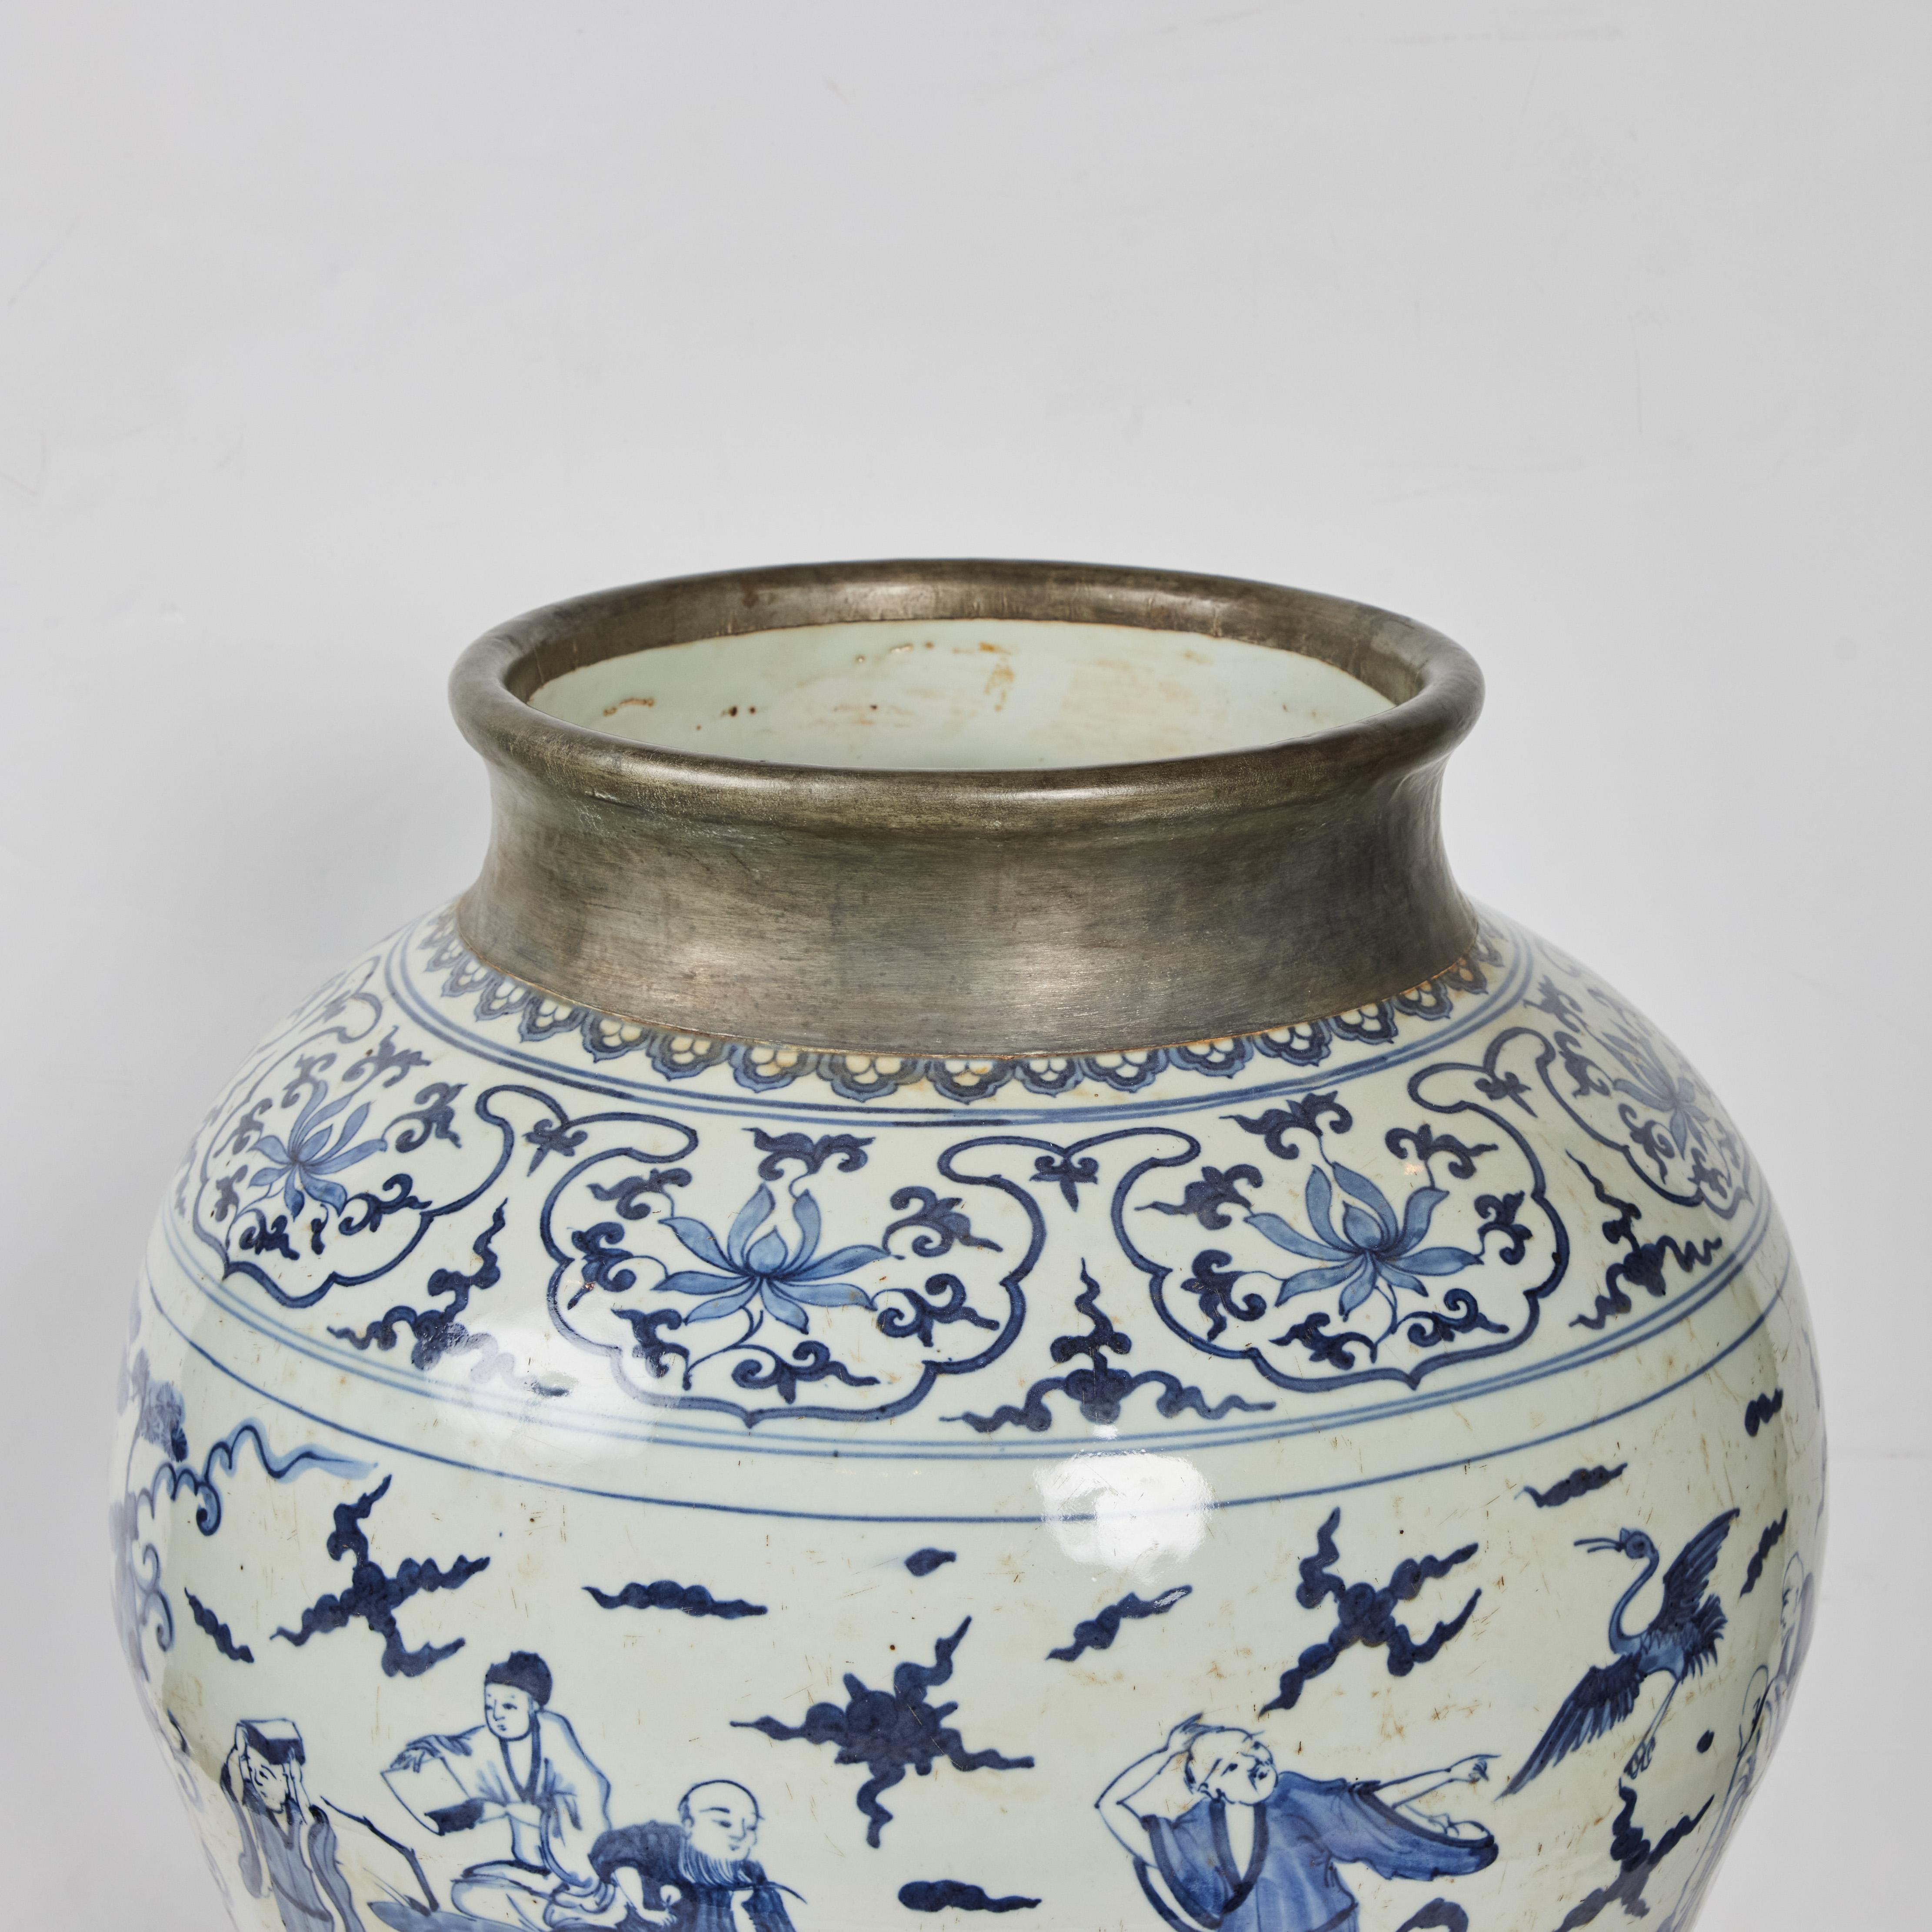 Porcelain Jar Yuan Dynasty-Style  In Good Condition For Sale In Newport Beach, CA